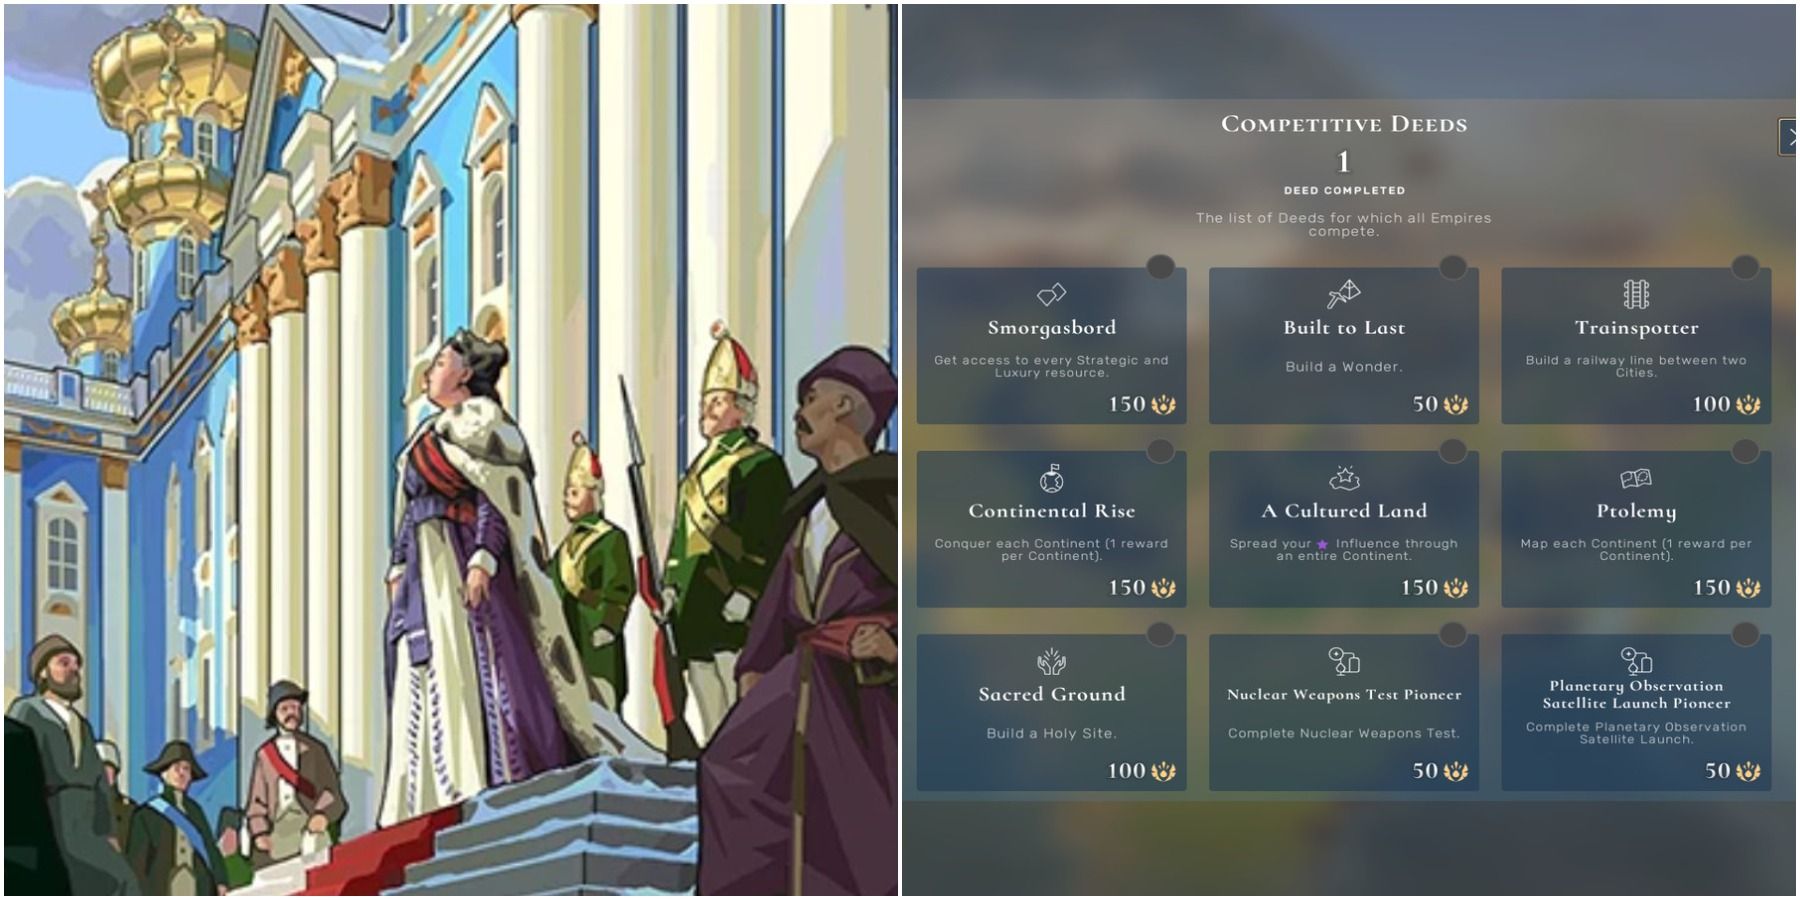 (Left) Queen standing proudly on a staircase (Right) Competitve Deeds overview